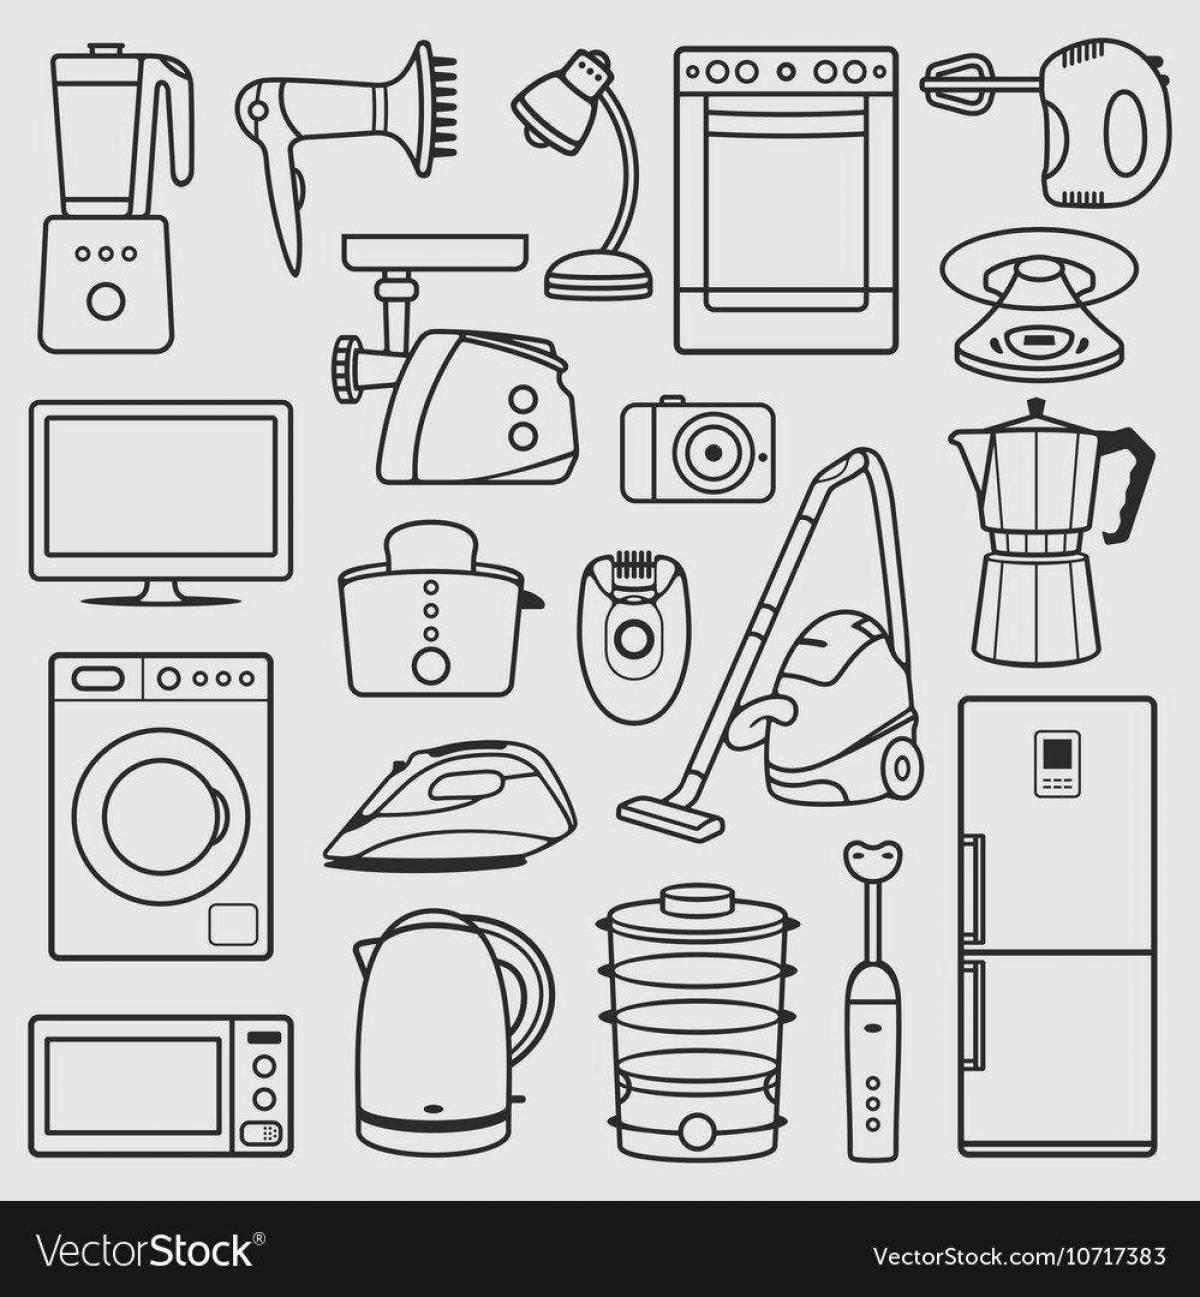 Bright household appliances coloring book for children 5-6 years old